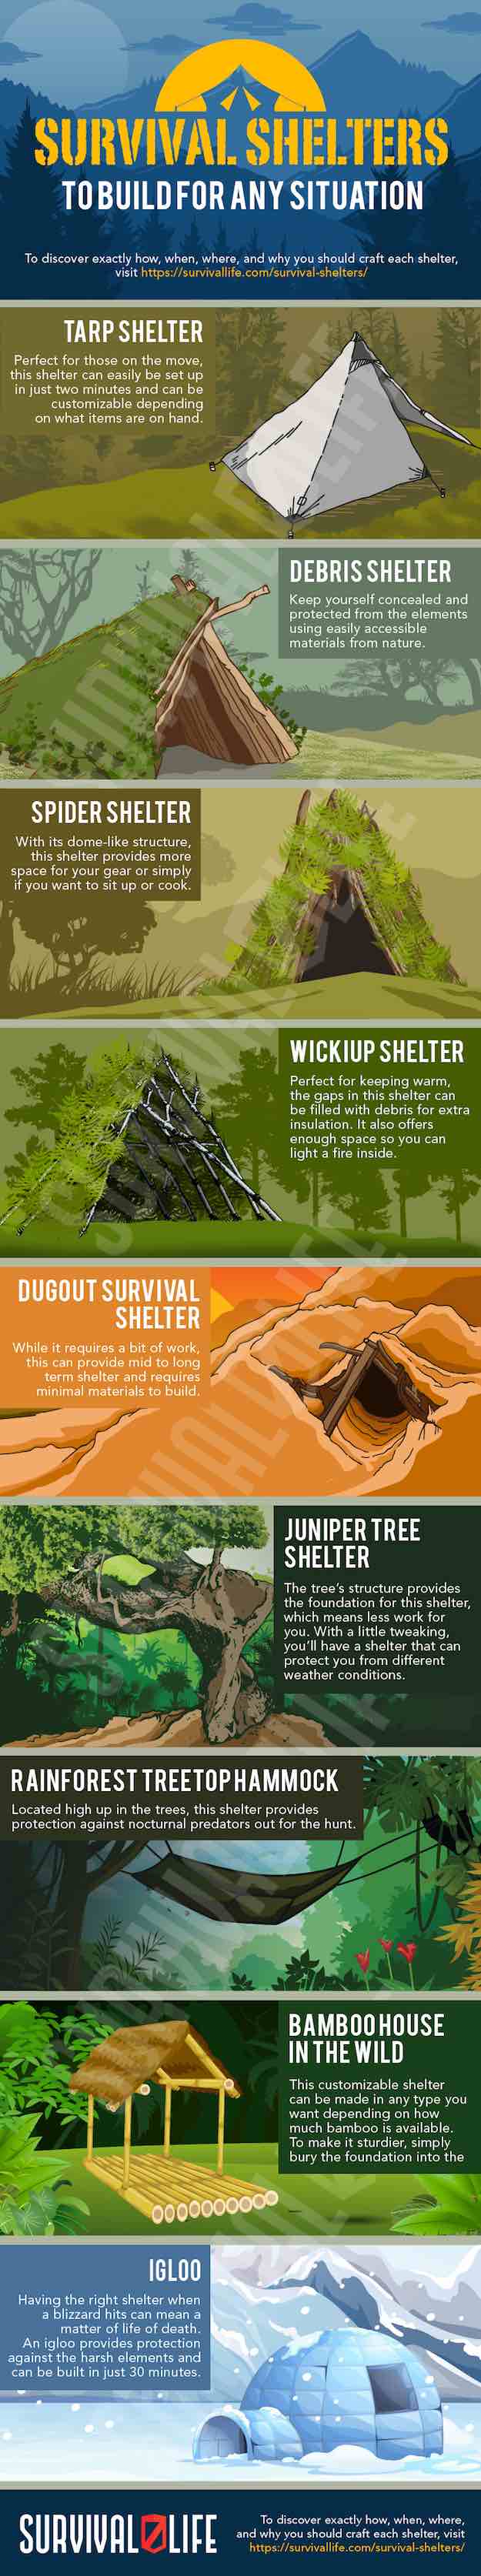 DIY Survival Shelters You Need To Know To Survive Anything